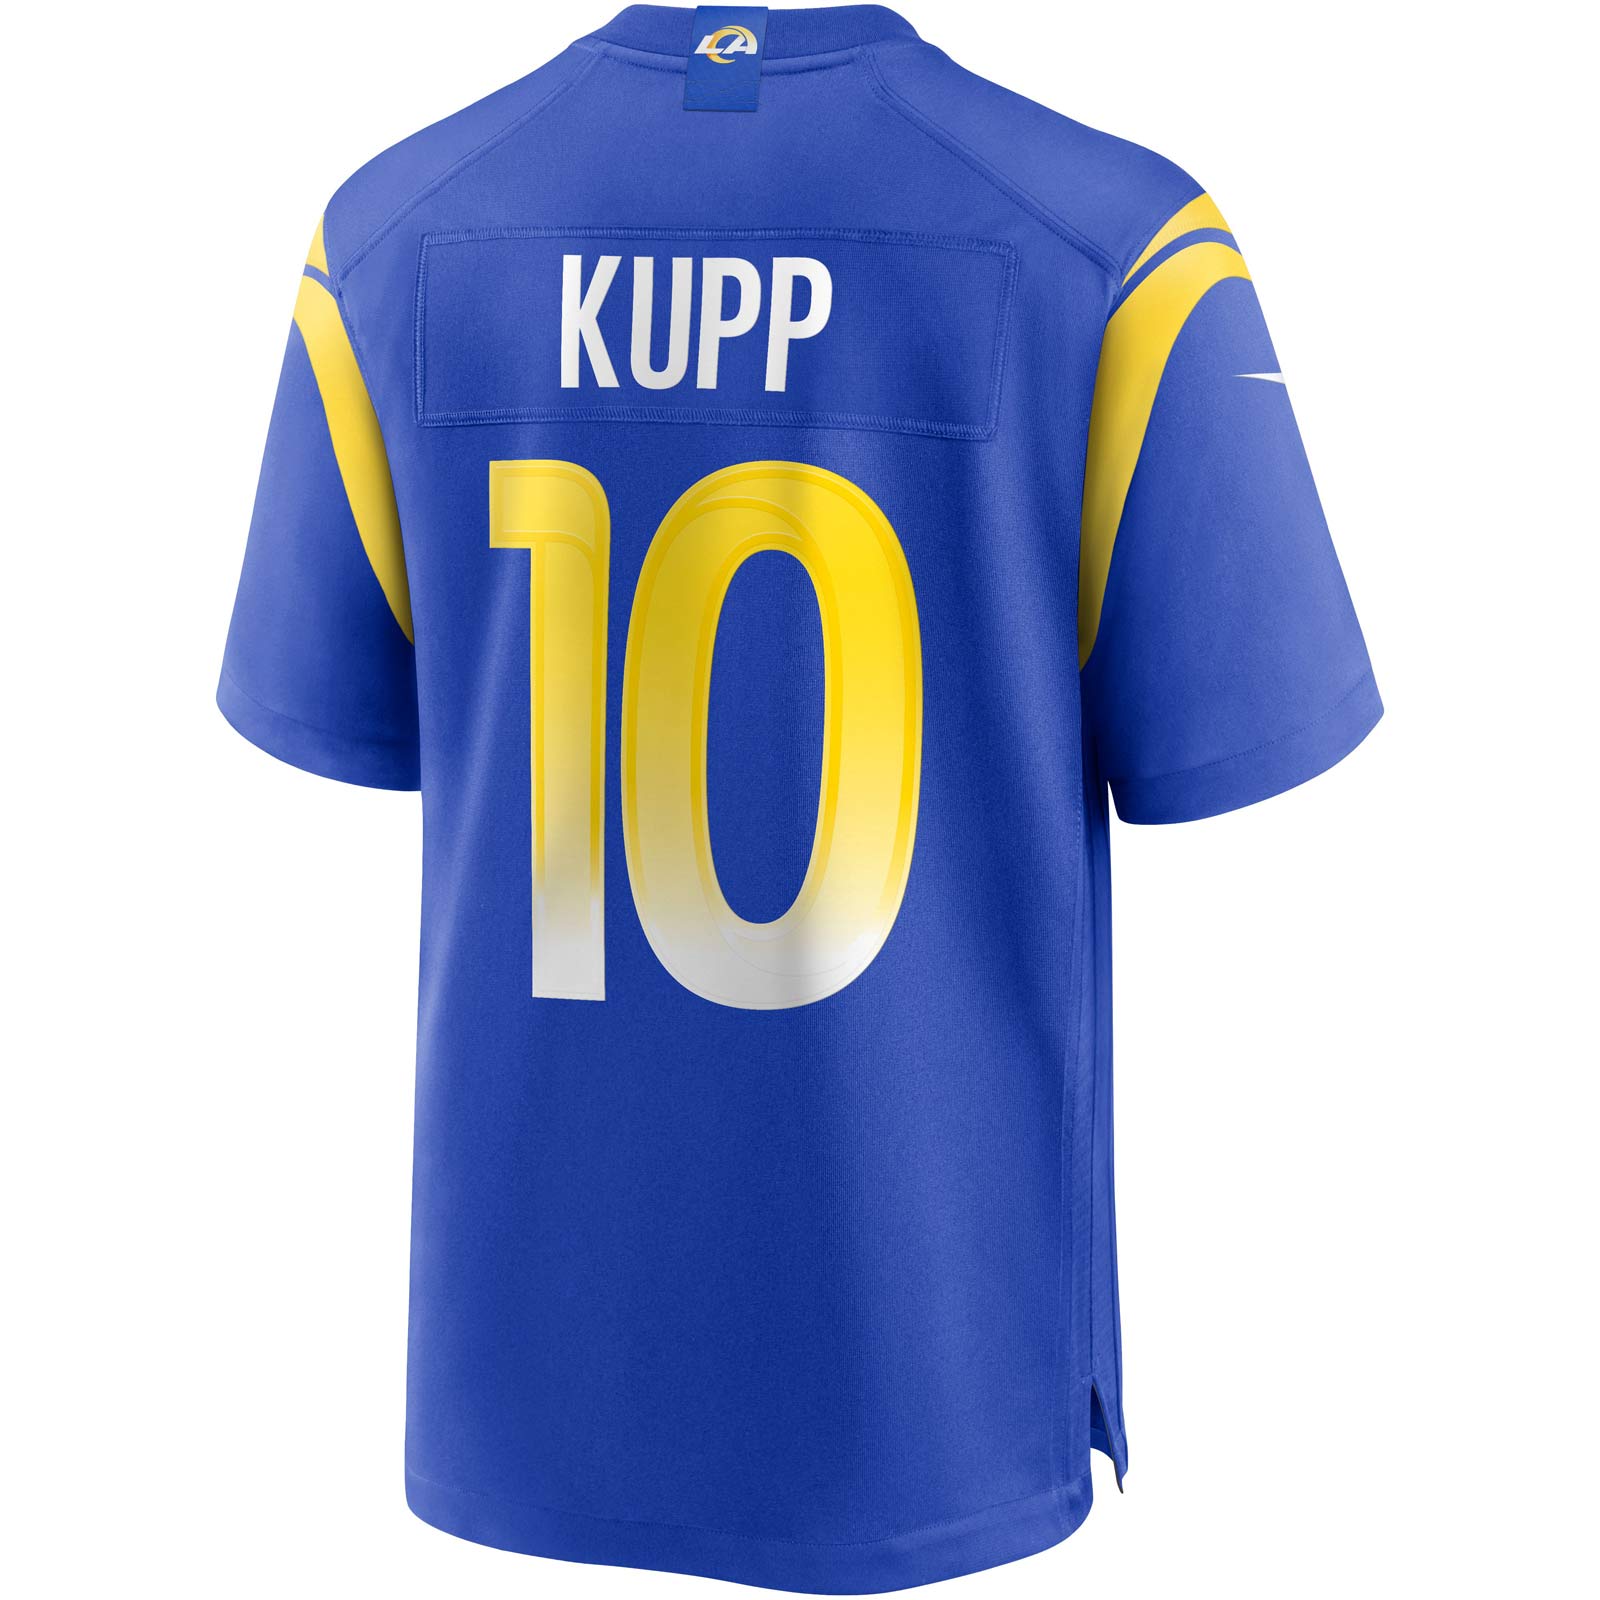 NIKE LOS ANGELES RAMS KUPP 10 HOME GAME JERSEY